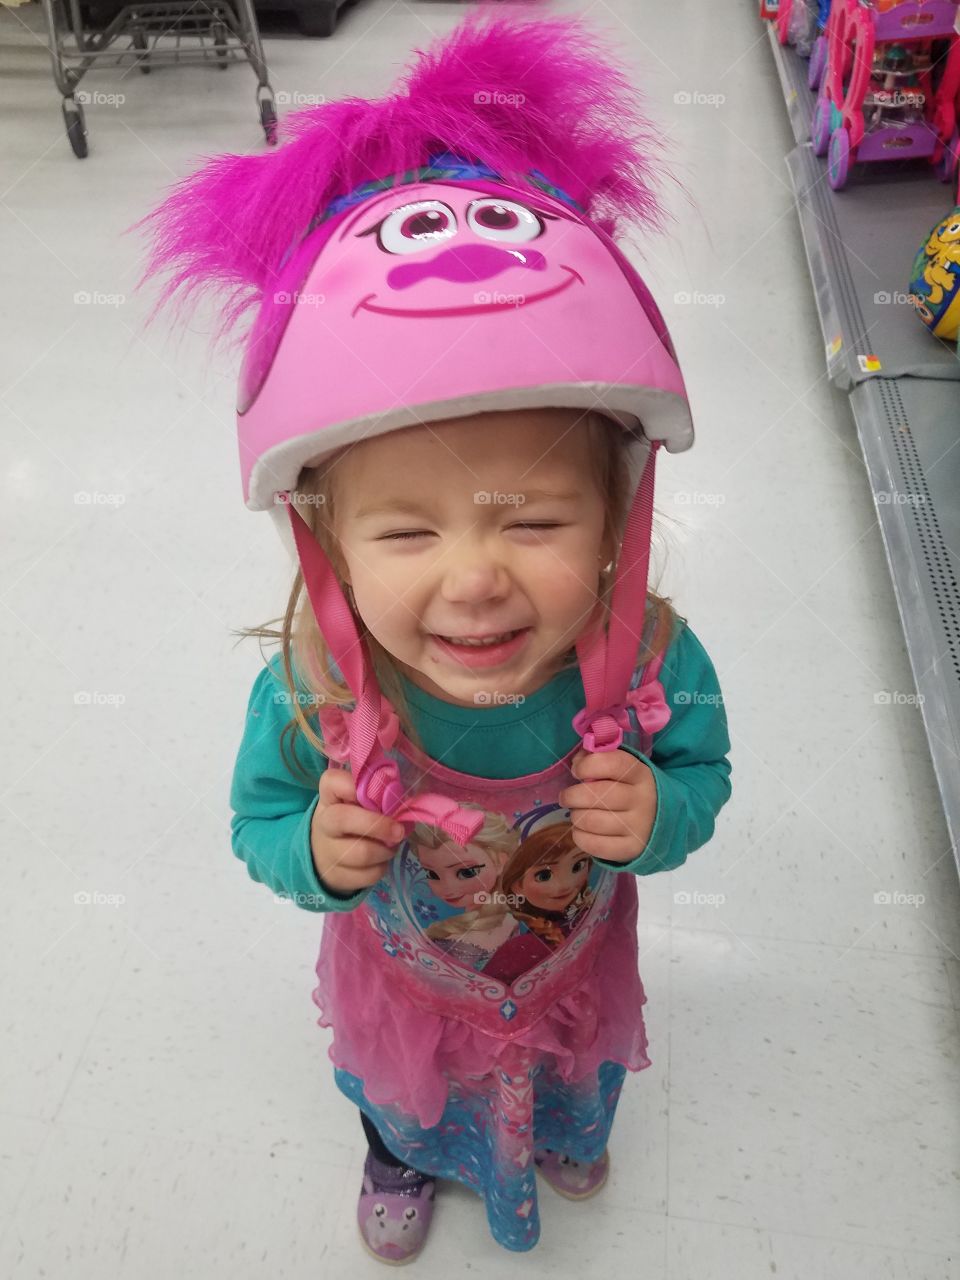 my beautiful daughter loves to ride on anything that moves especially on ATVs. Here she is trying on a helmet in Beaumont